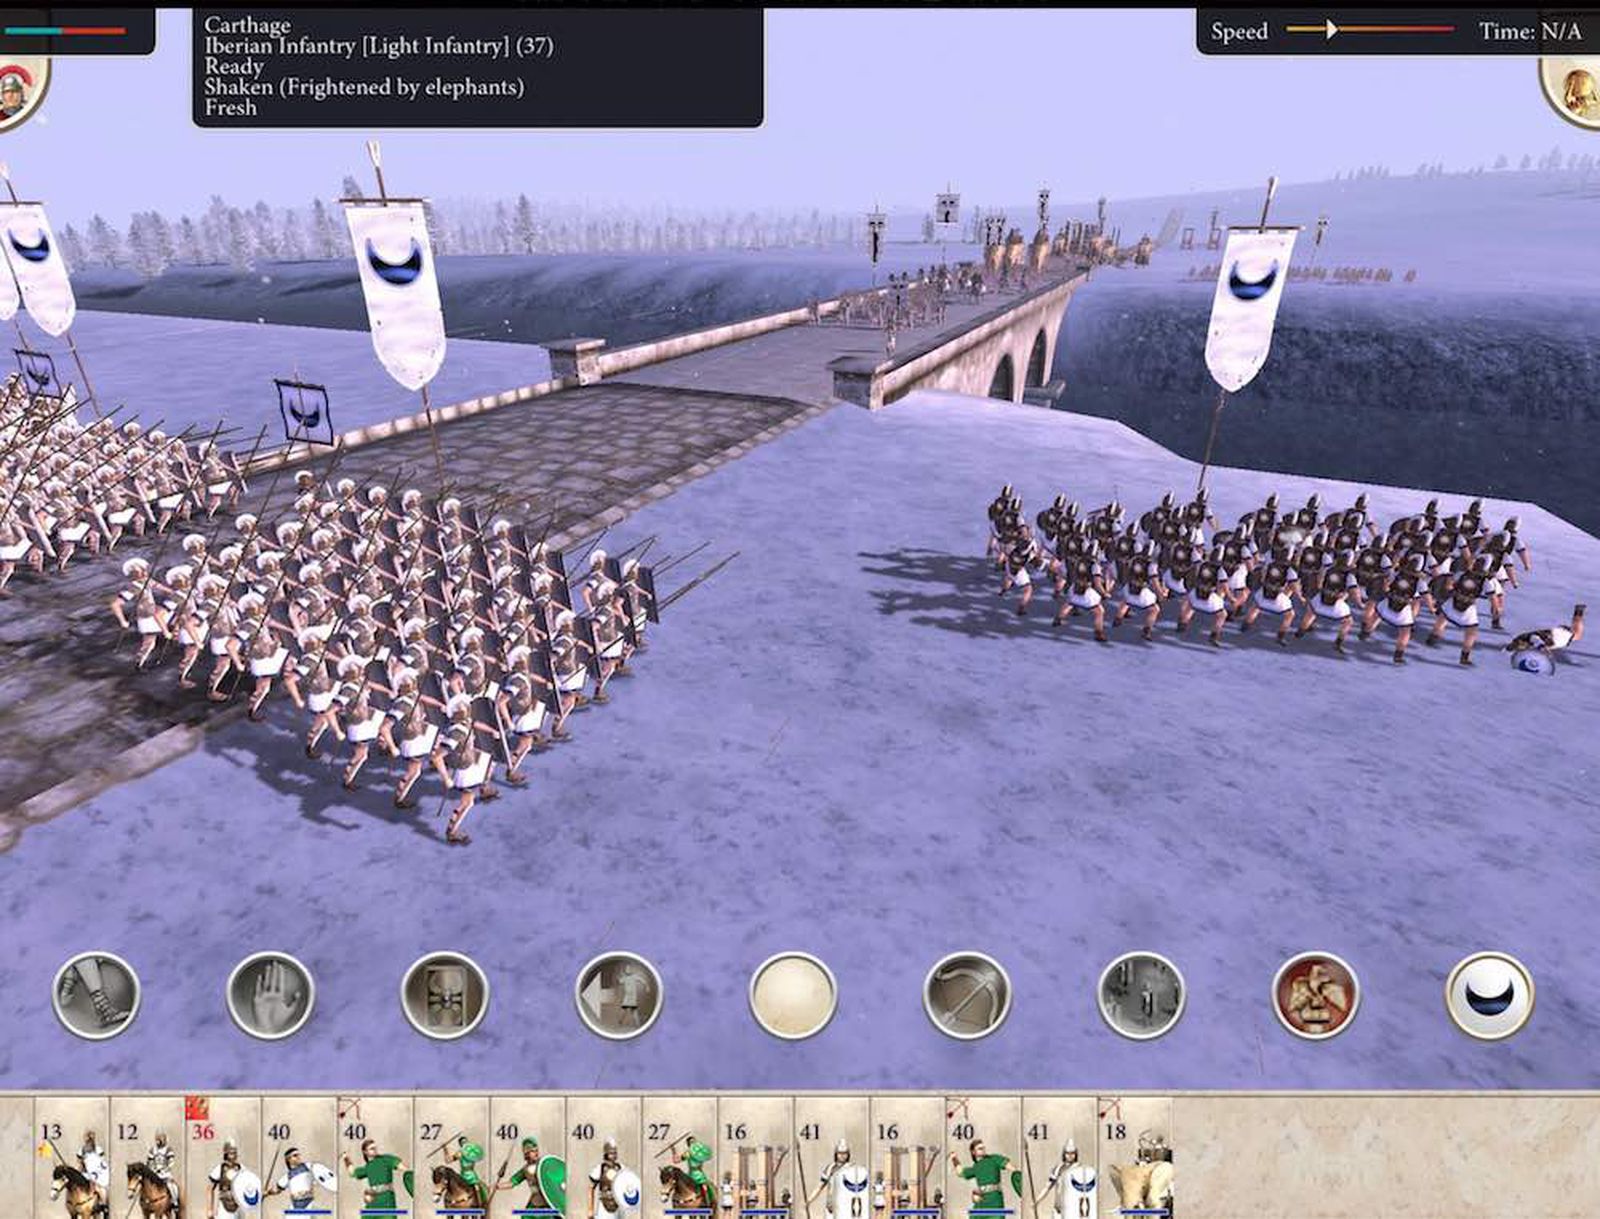 Classic Strategy Game 'Rome: Total War' Now Available on iPad for